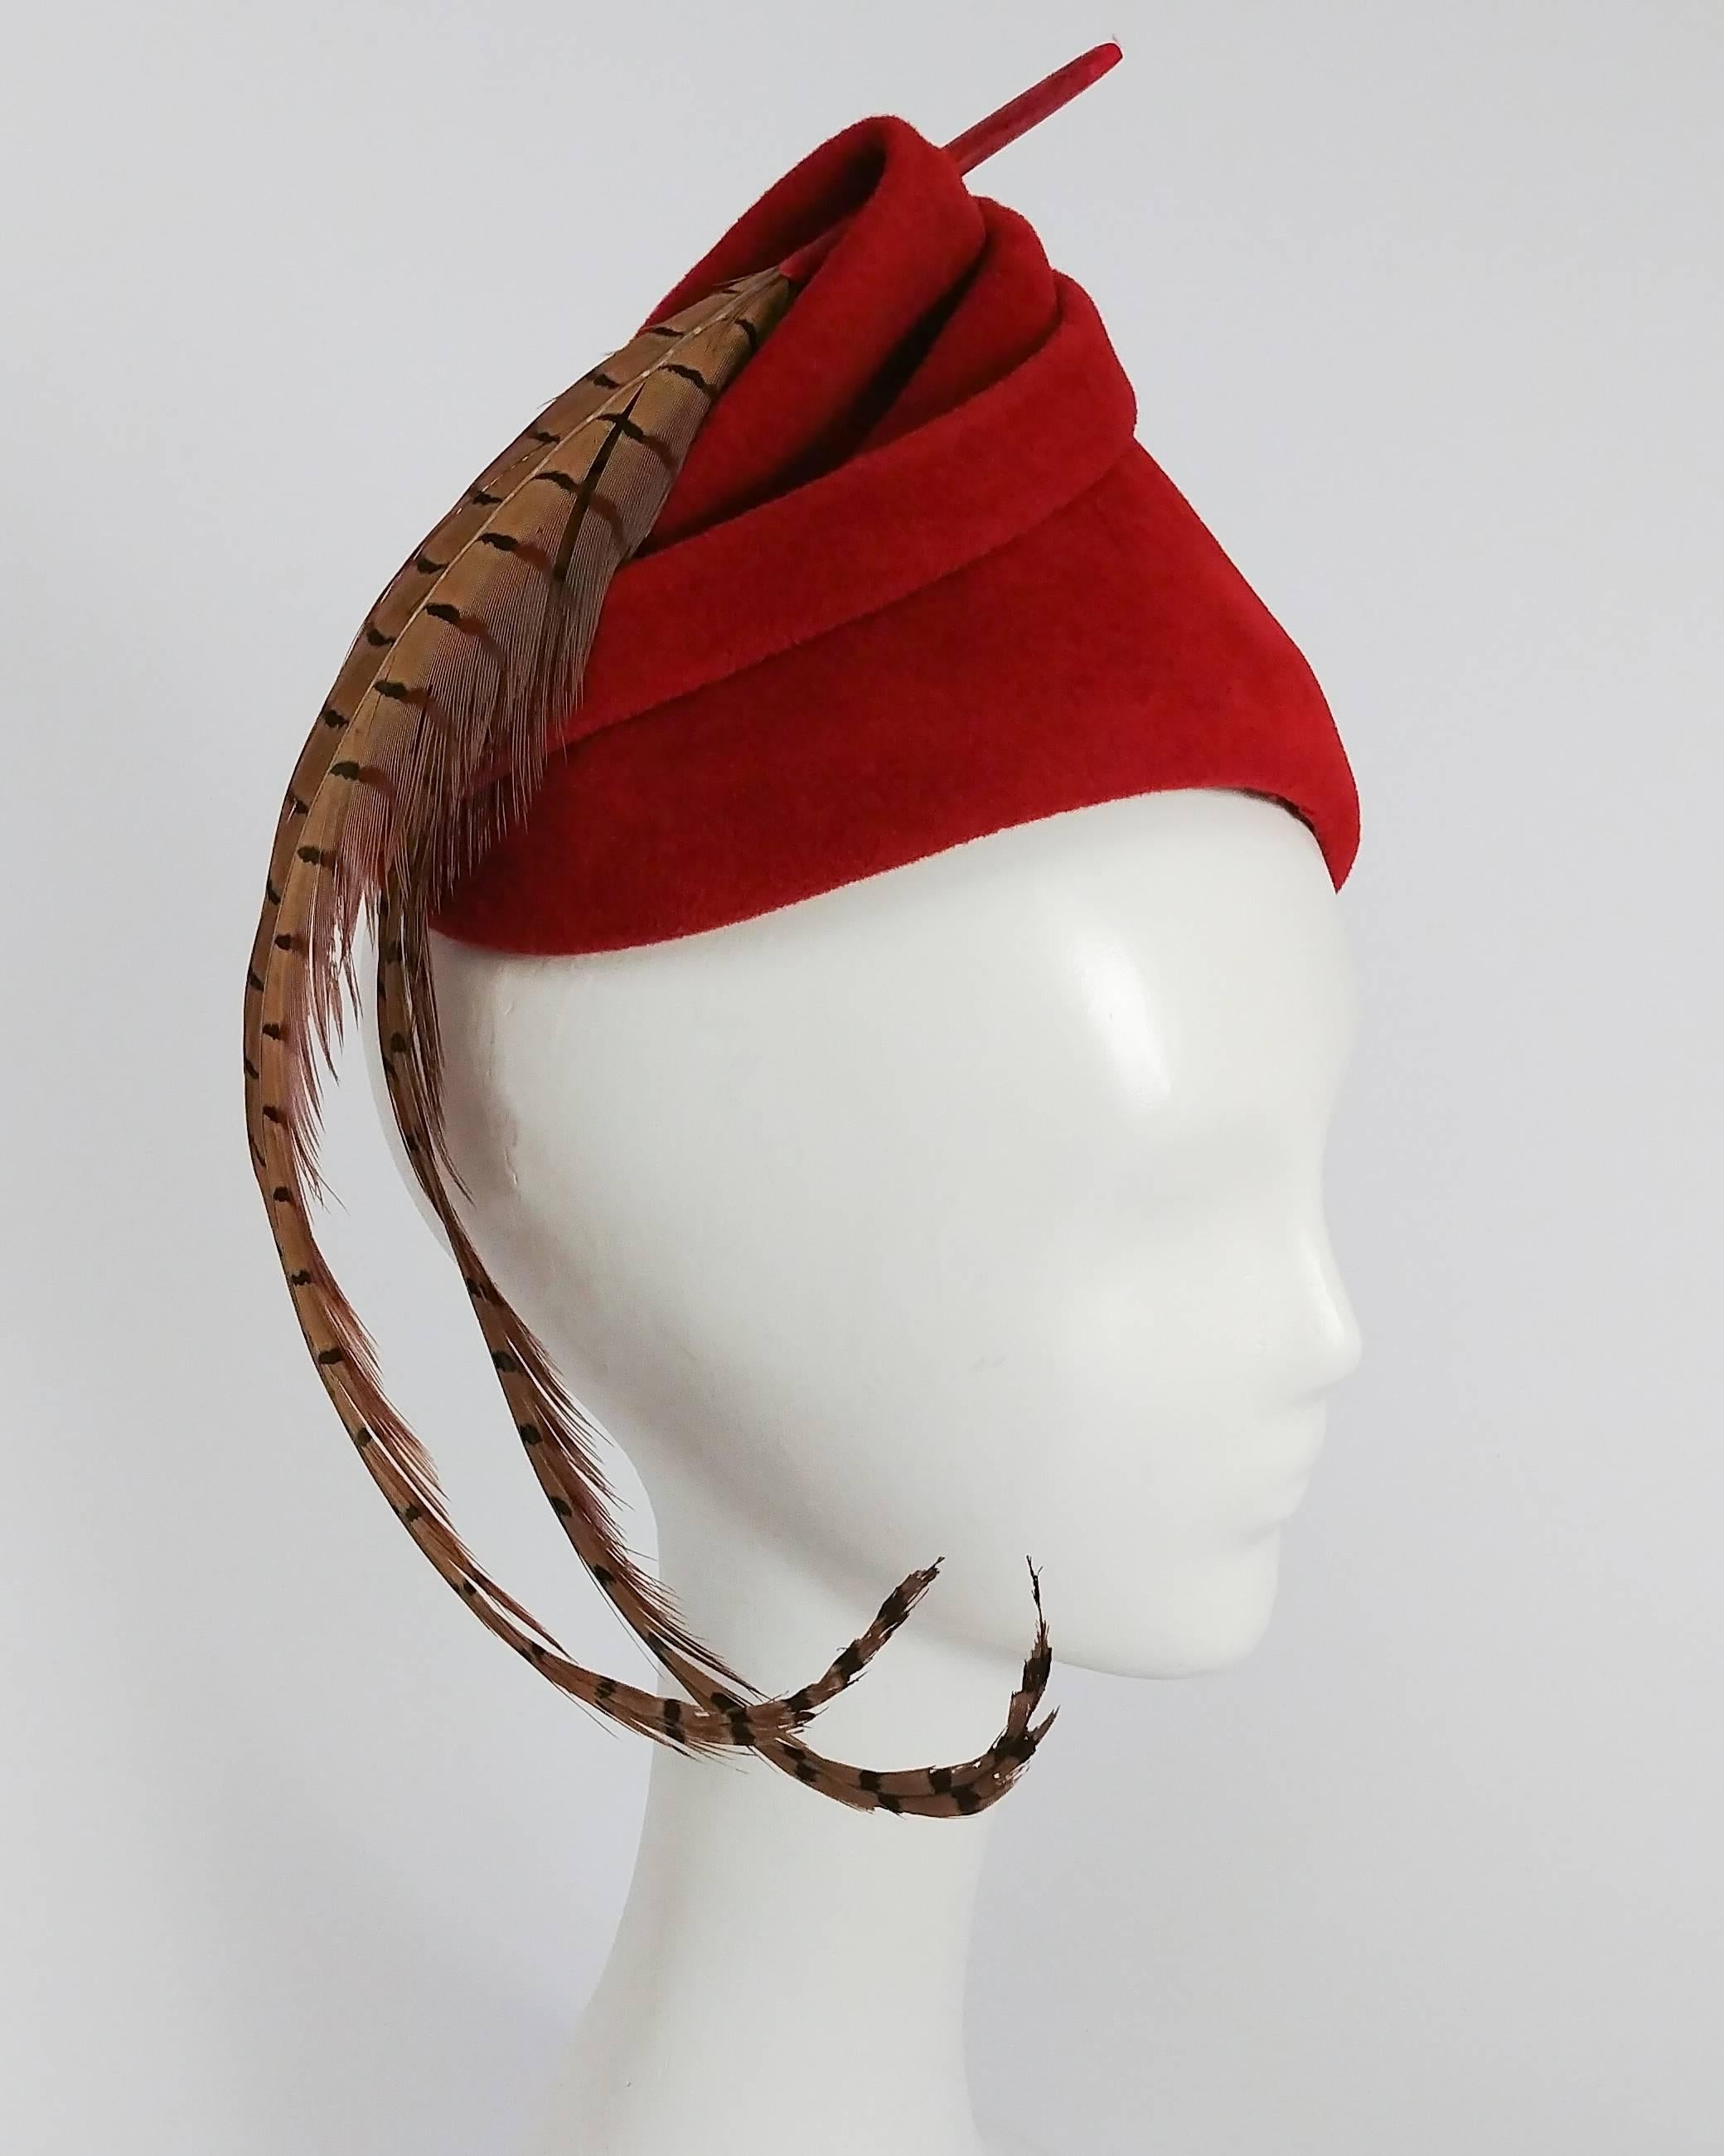 1940s Red Felt Surrealist Hat w/ Pheasant Feather. Two curled pheasant feathers adorn top of the hat and fall below the chin. Ruched top of hat further embellished with felt loop to create whimsical spiral effect.  